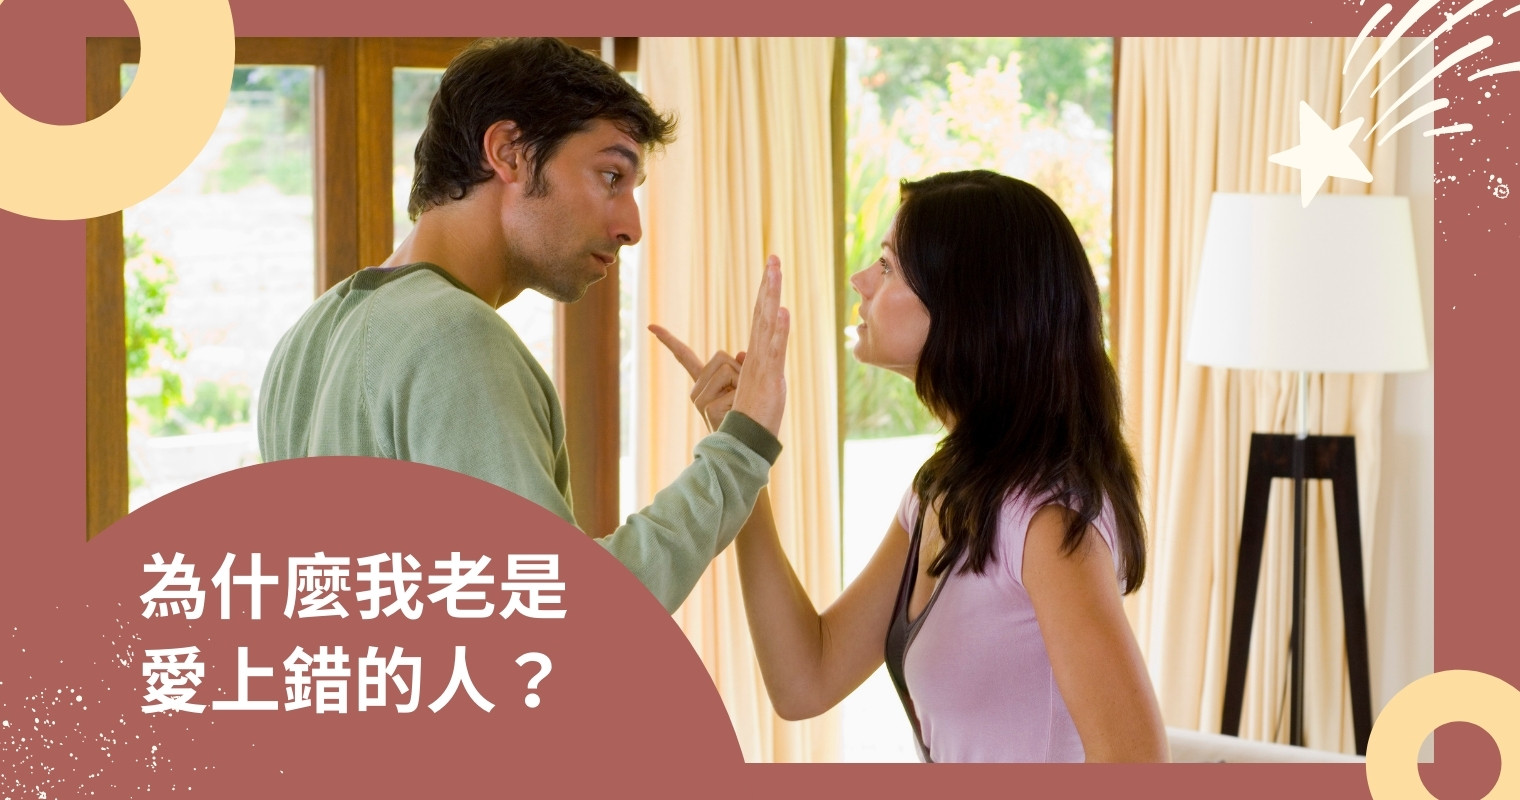 You are currently viewing 兩性關係｜為什麼我老是愛上錯的人？